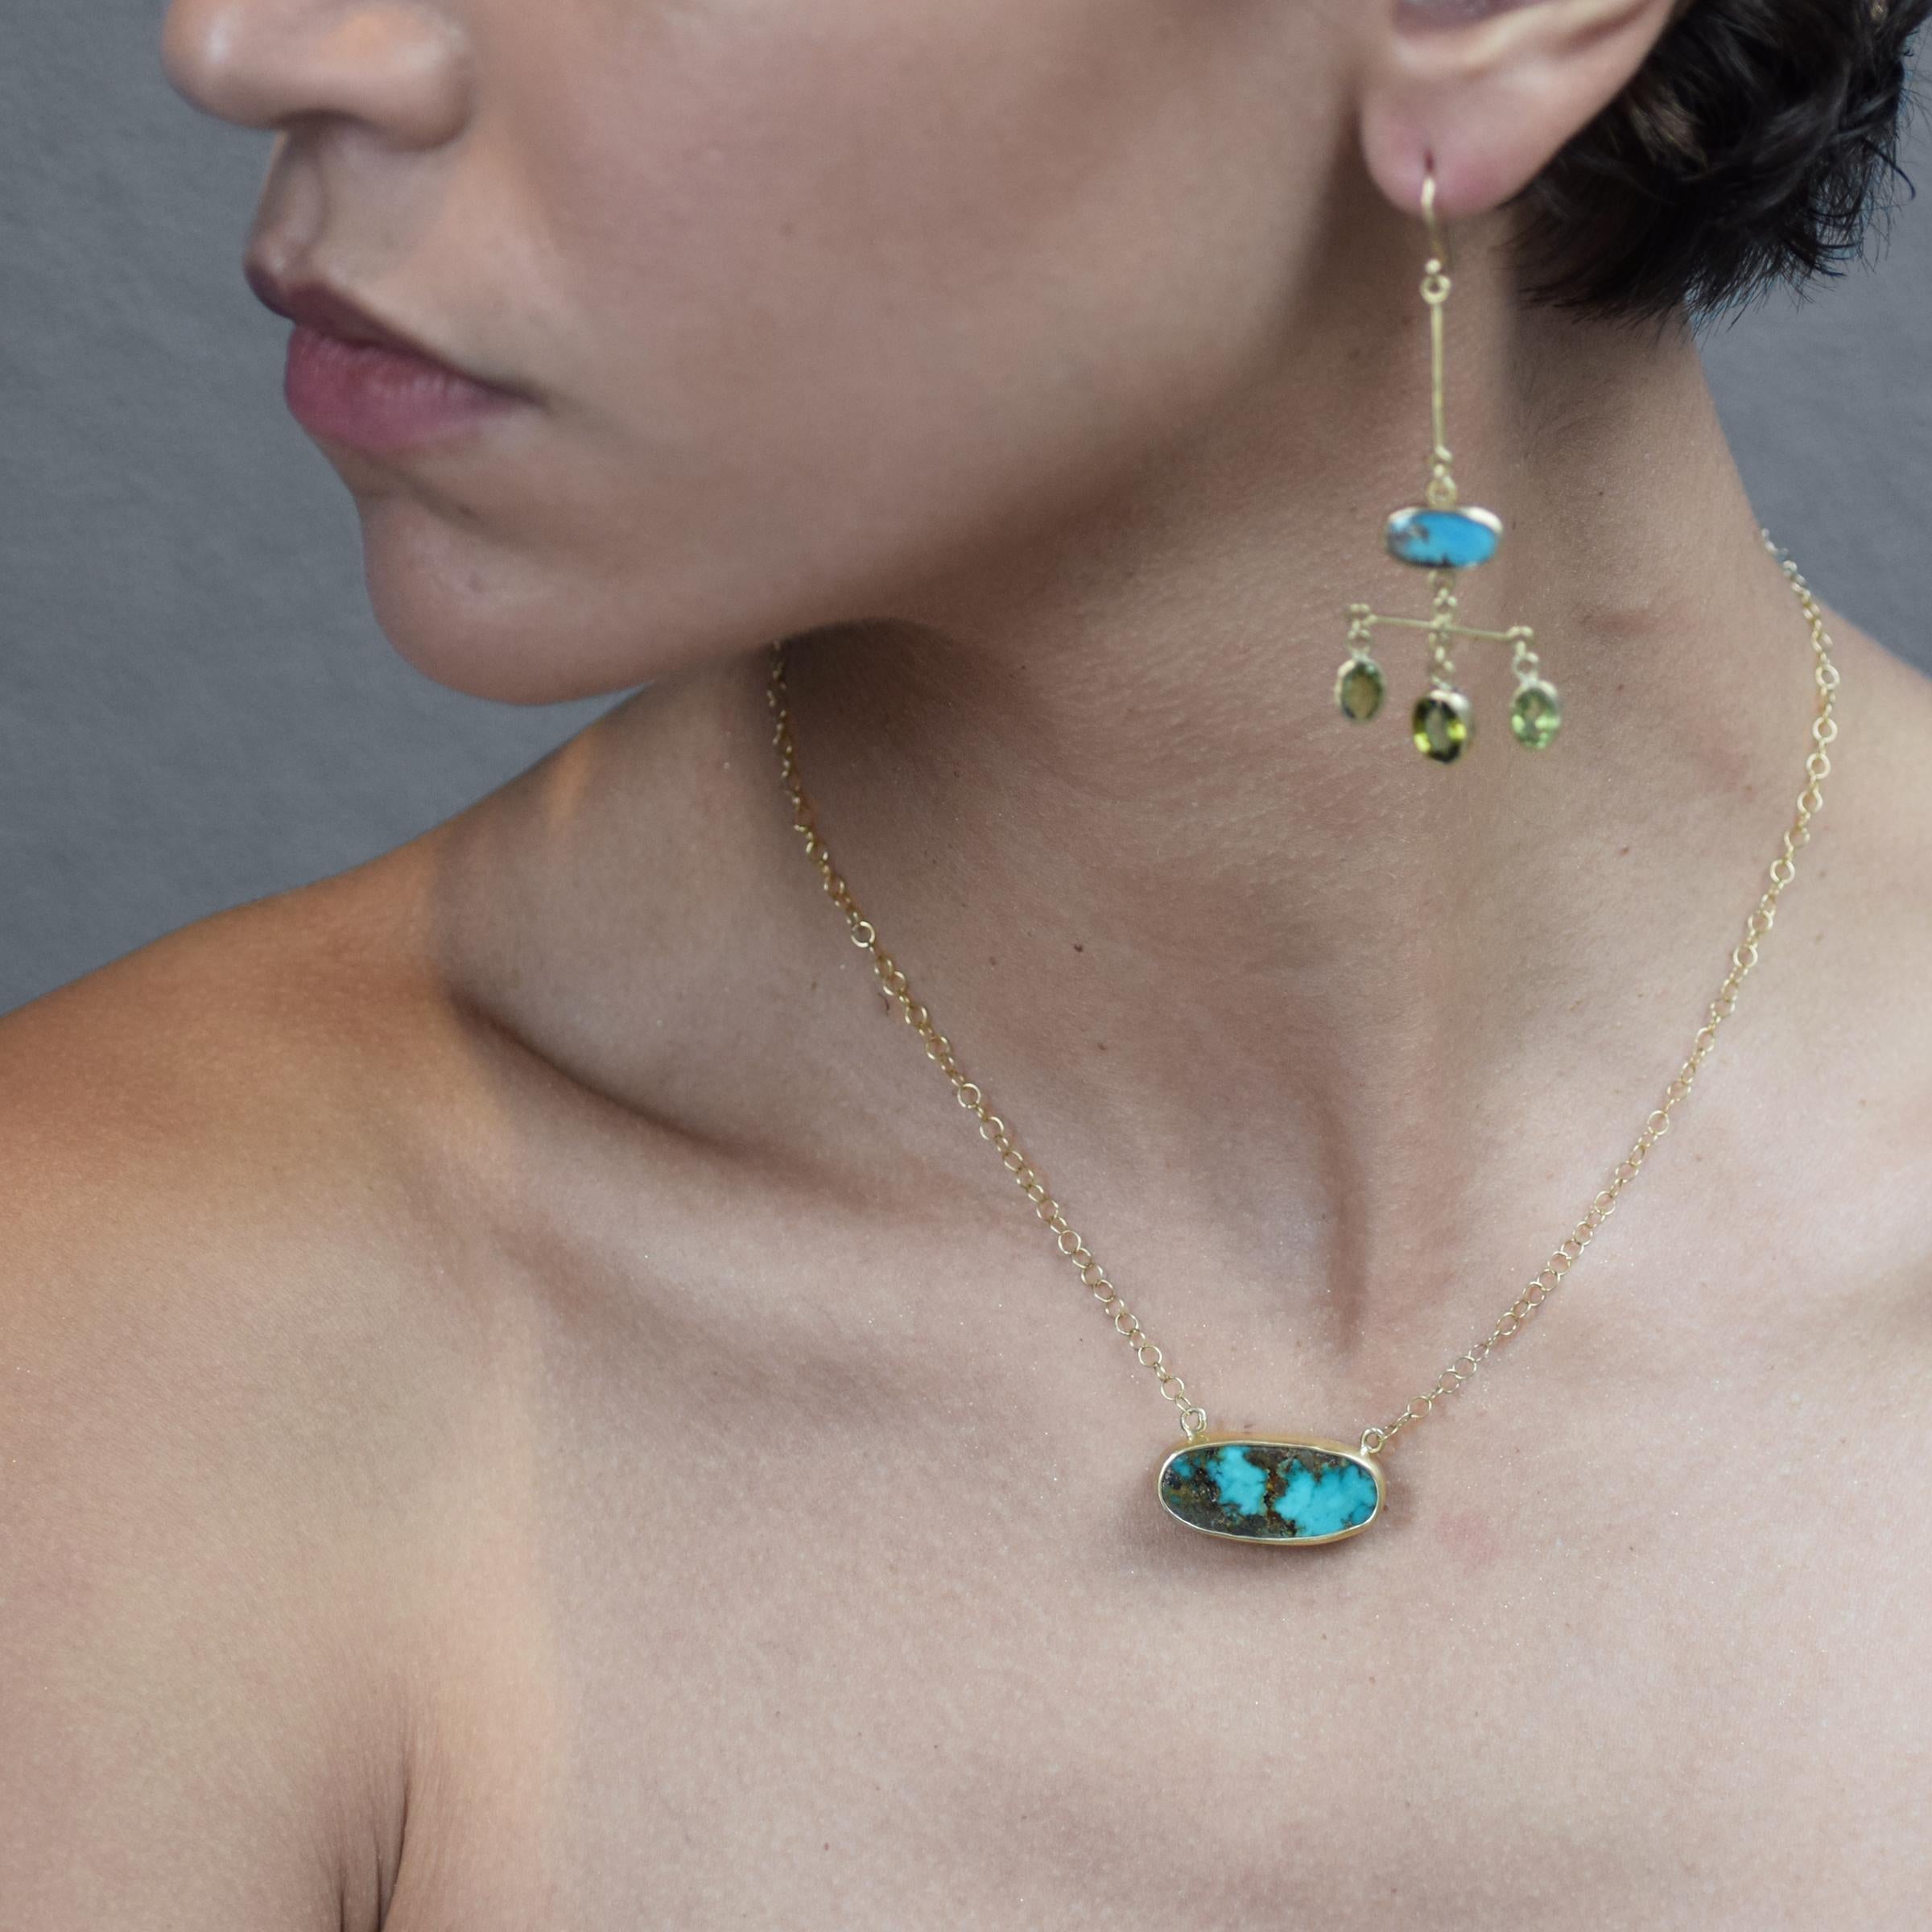 Here's a one-of-a-kind 18K gold choker featuring this Persian Turquoise large oval gem.
The gem is bezel set in 18K gold with a sterling silver backing.  Simple, elegant and hand finished in a brushed matte. 
The turquoise measures 1-1/8